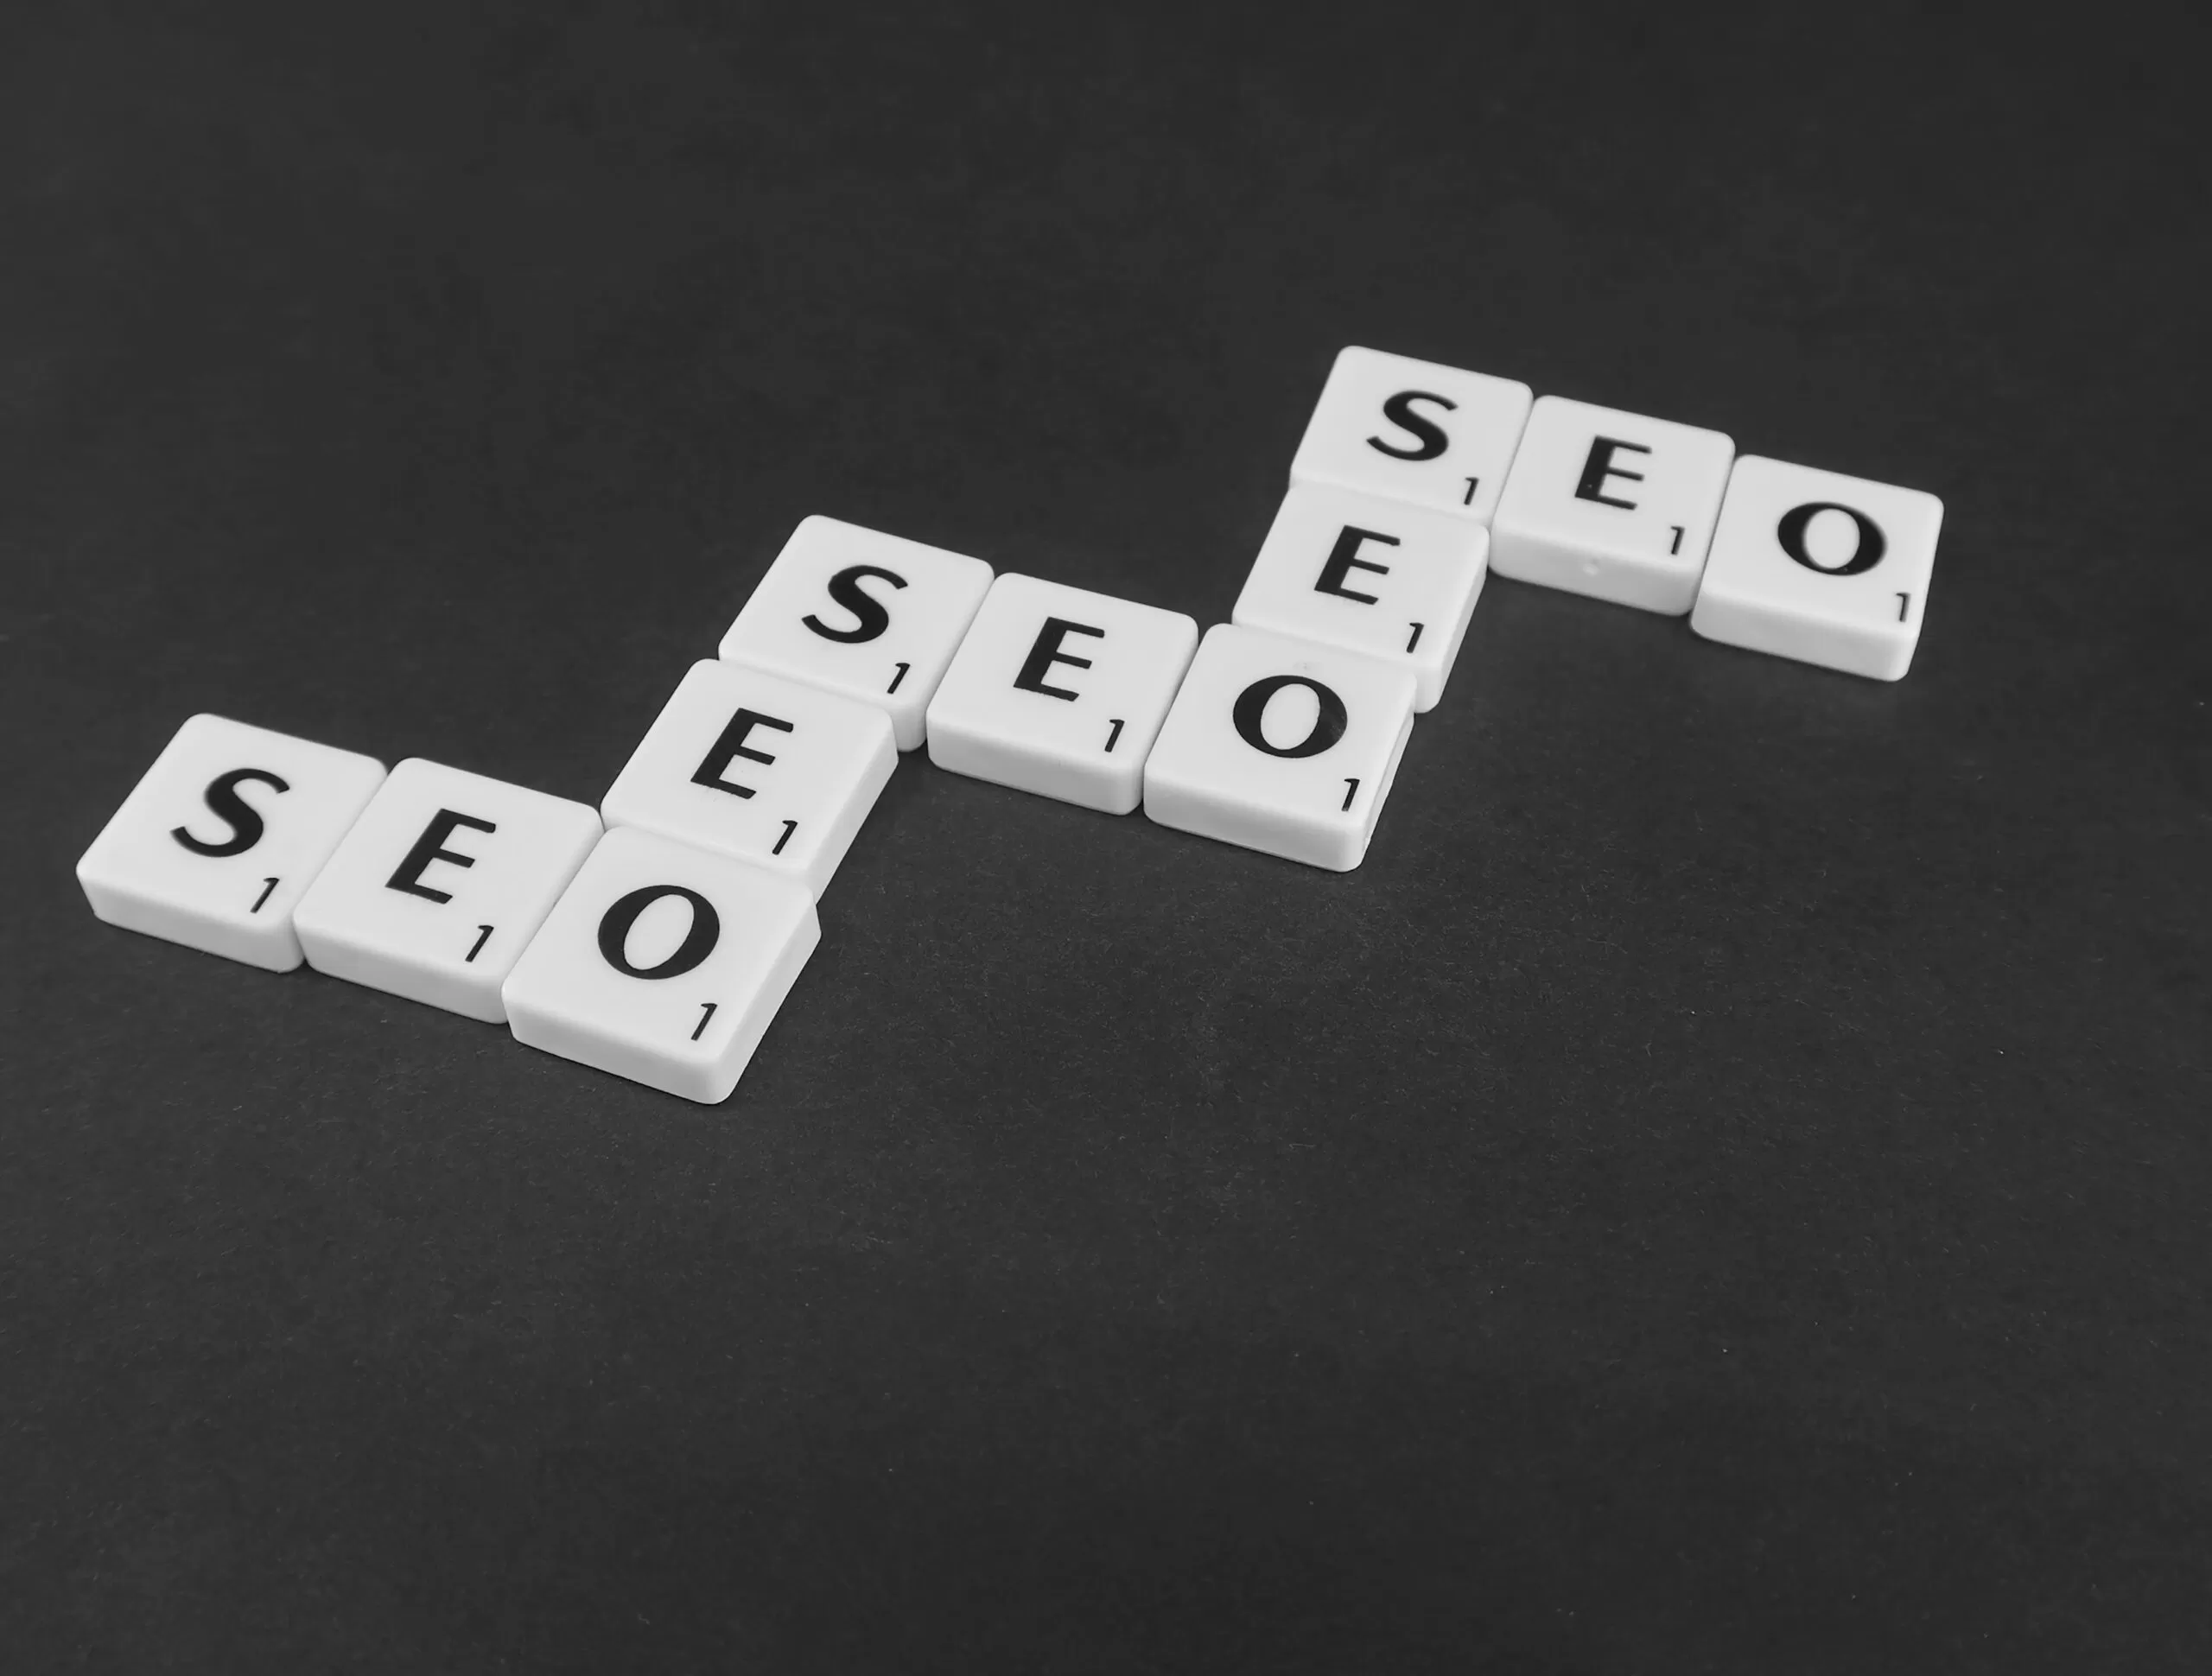 Easy-To-Understand Suggestions And Advice For Search Engine Optimization